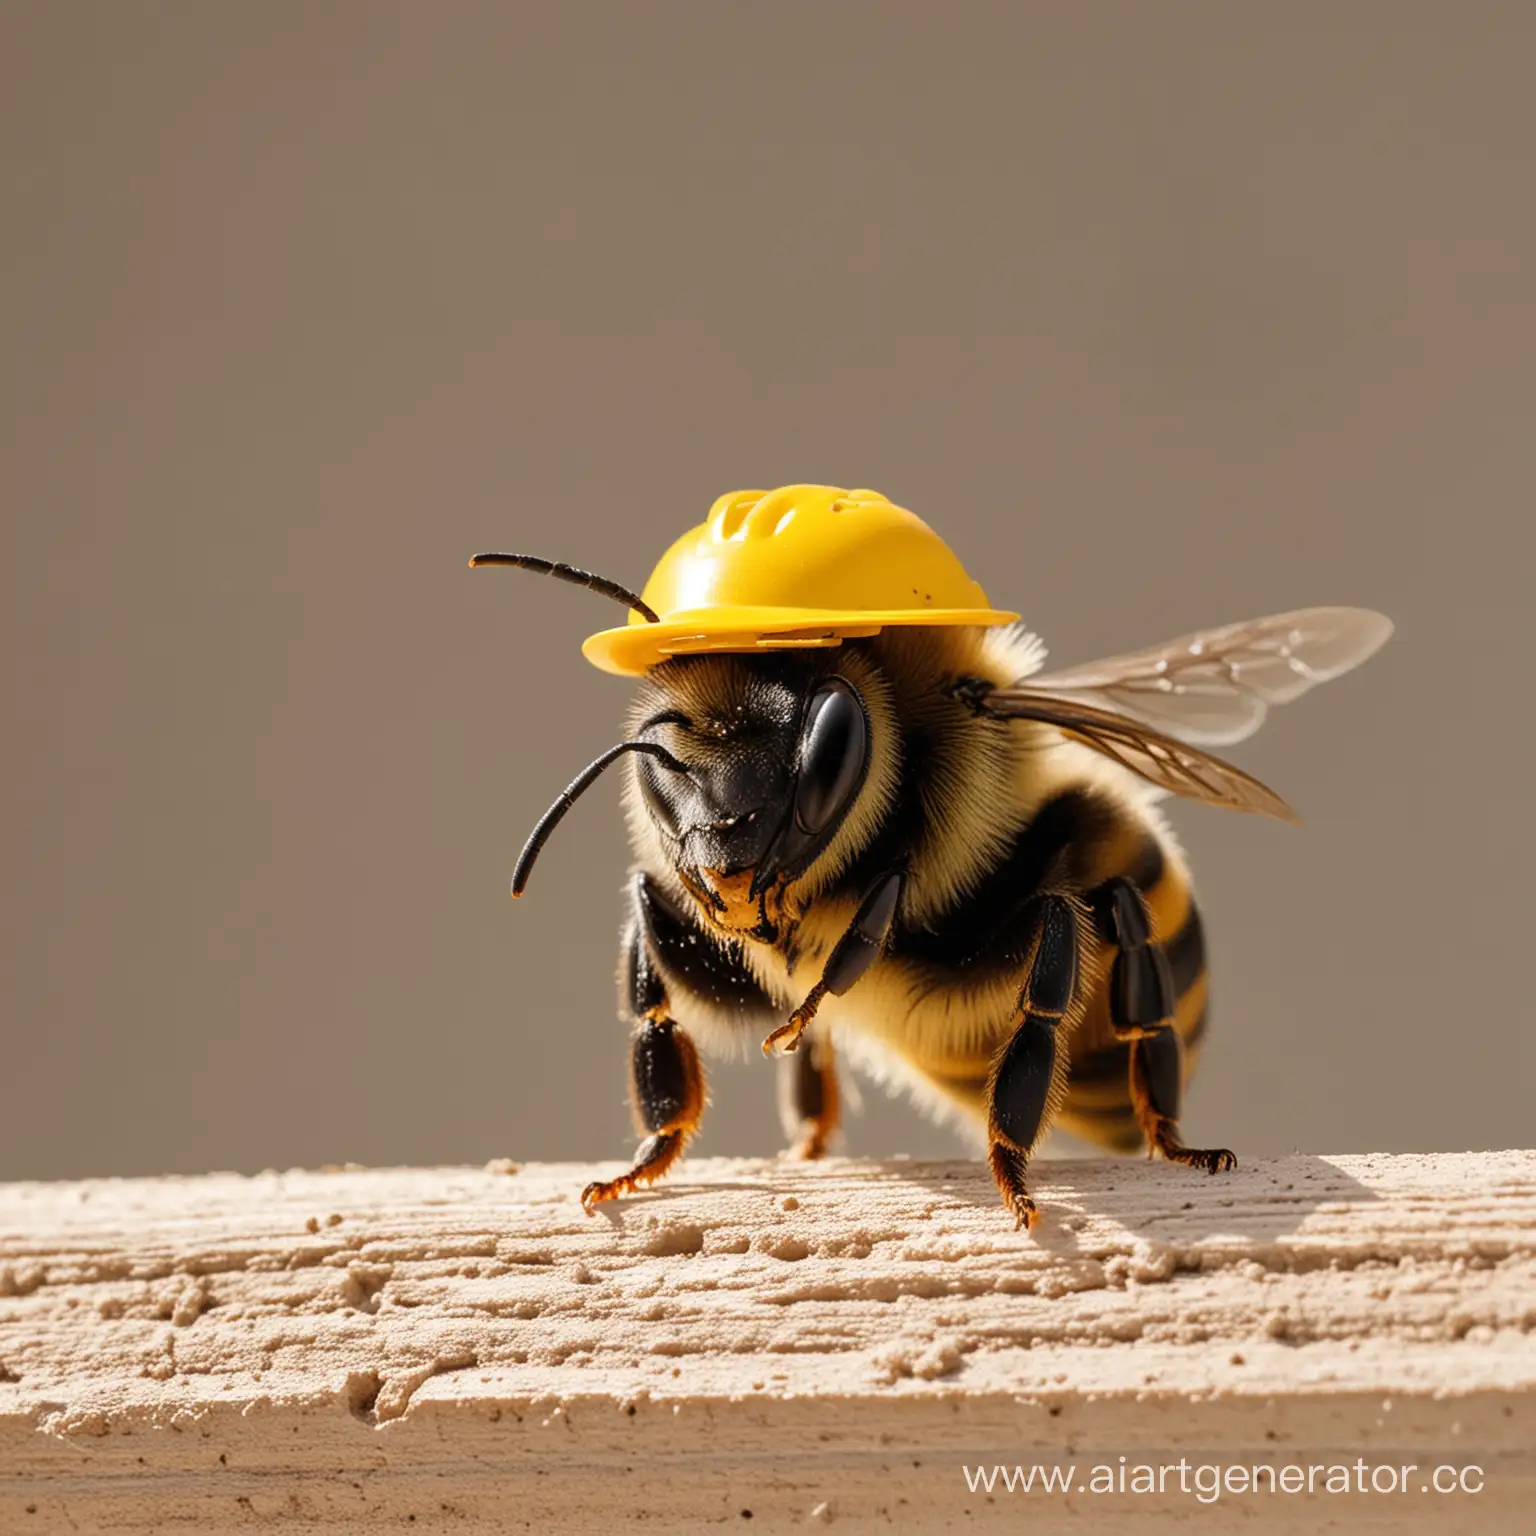 Busy-Bee-Wearing-a-Yellow-Construction-Helmet